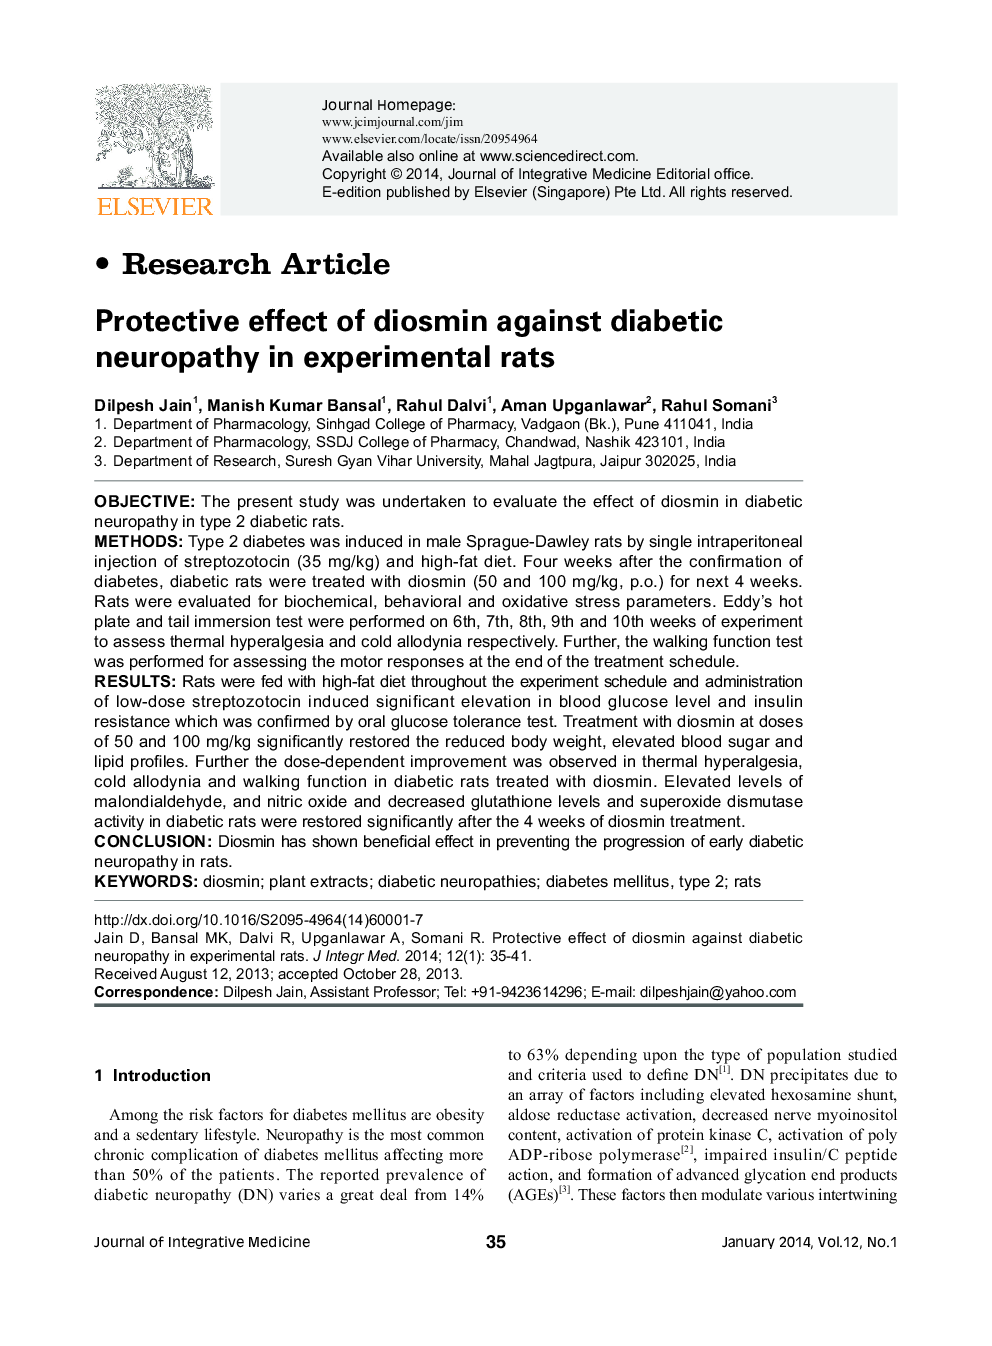 Protective effect of diosmin against diabetic neuropathy in experimental rats